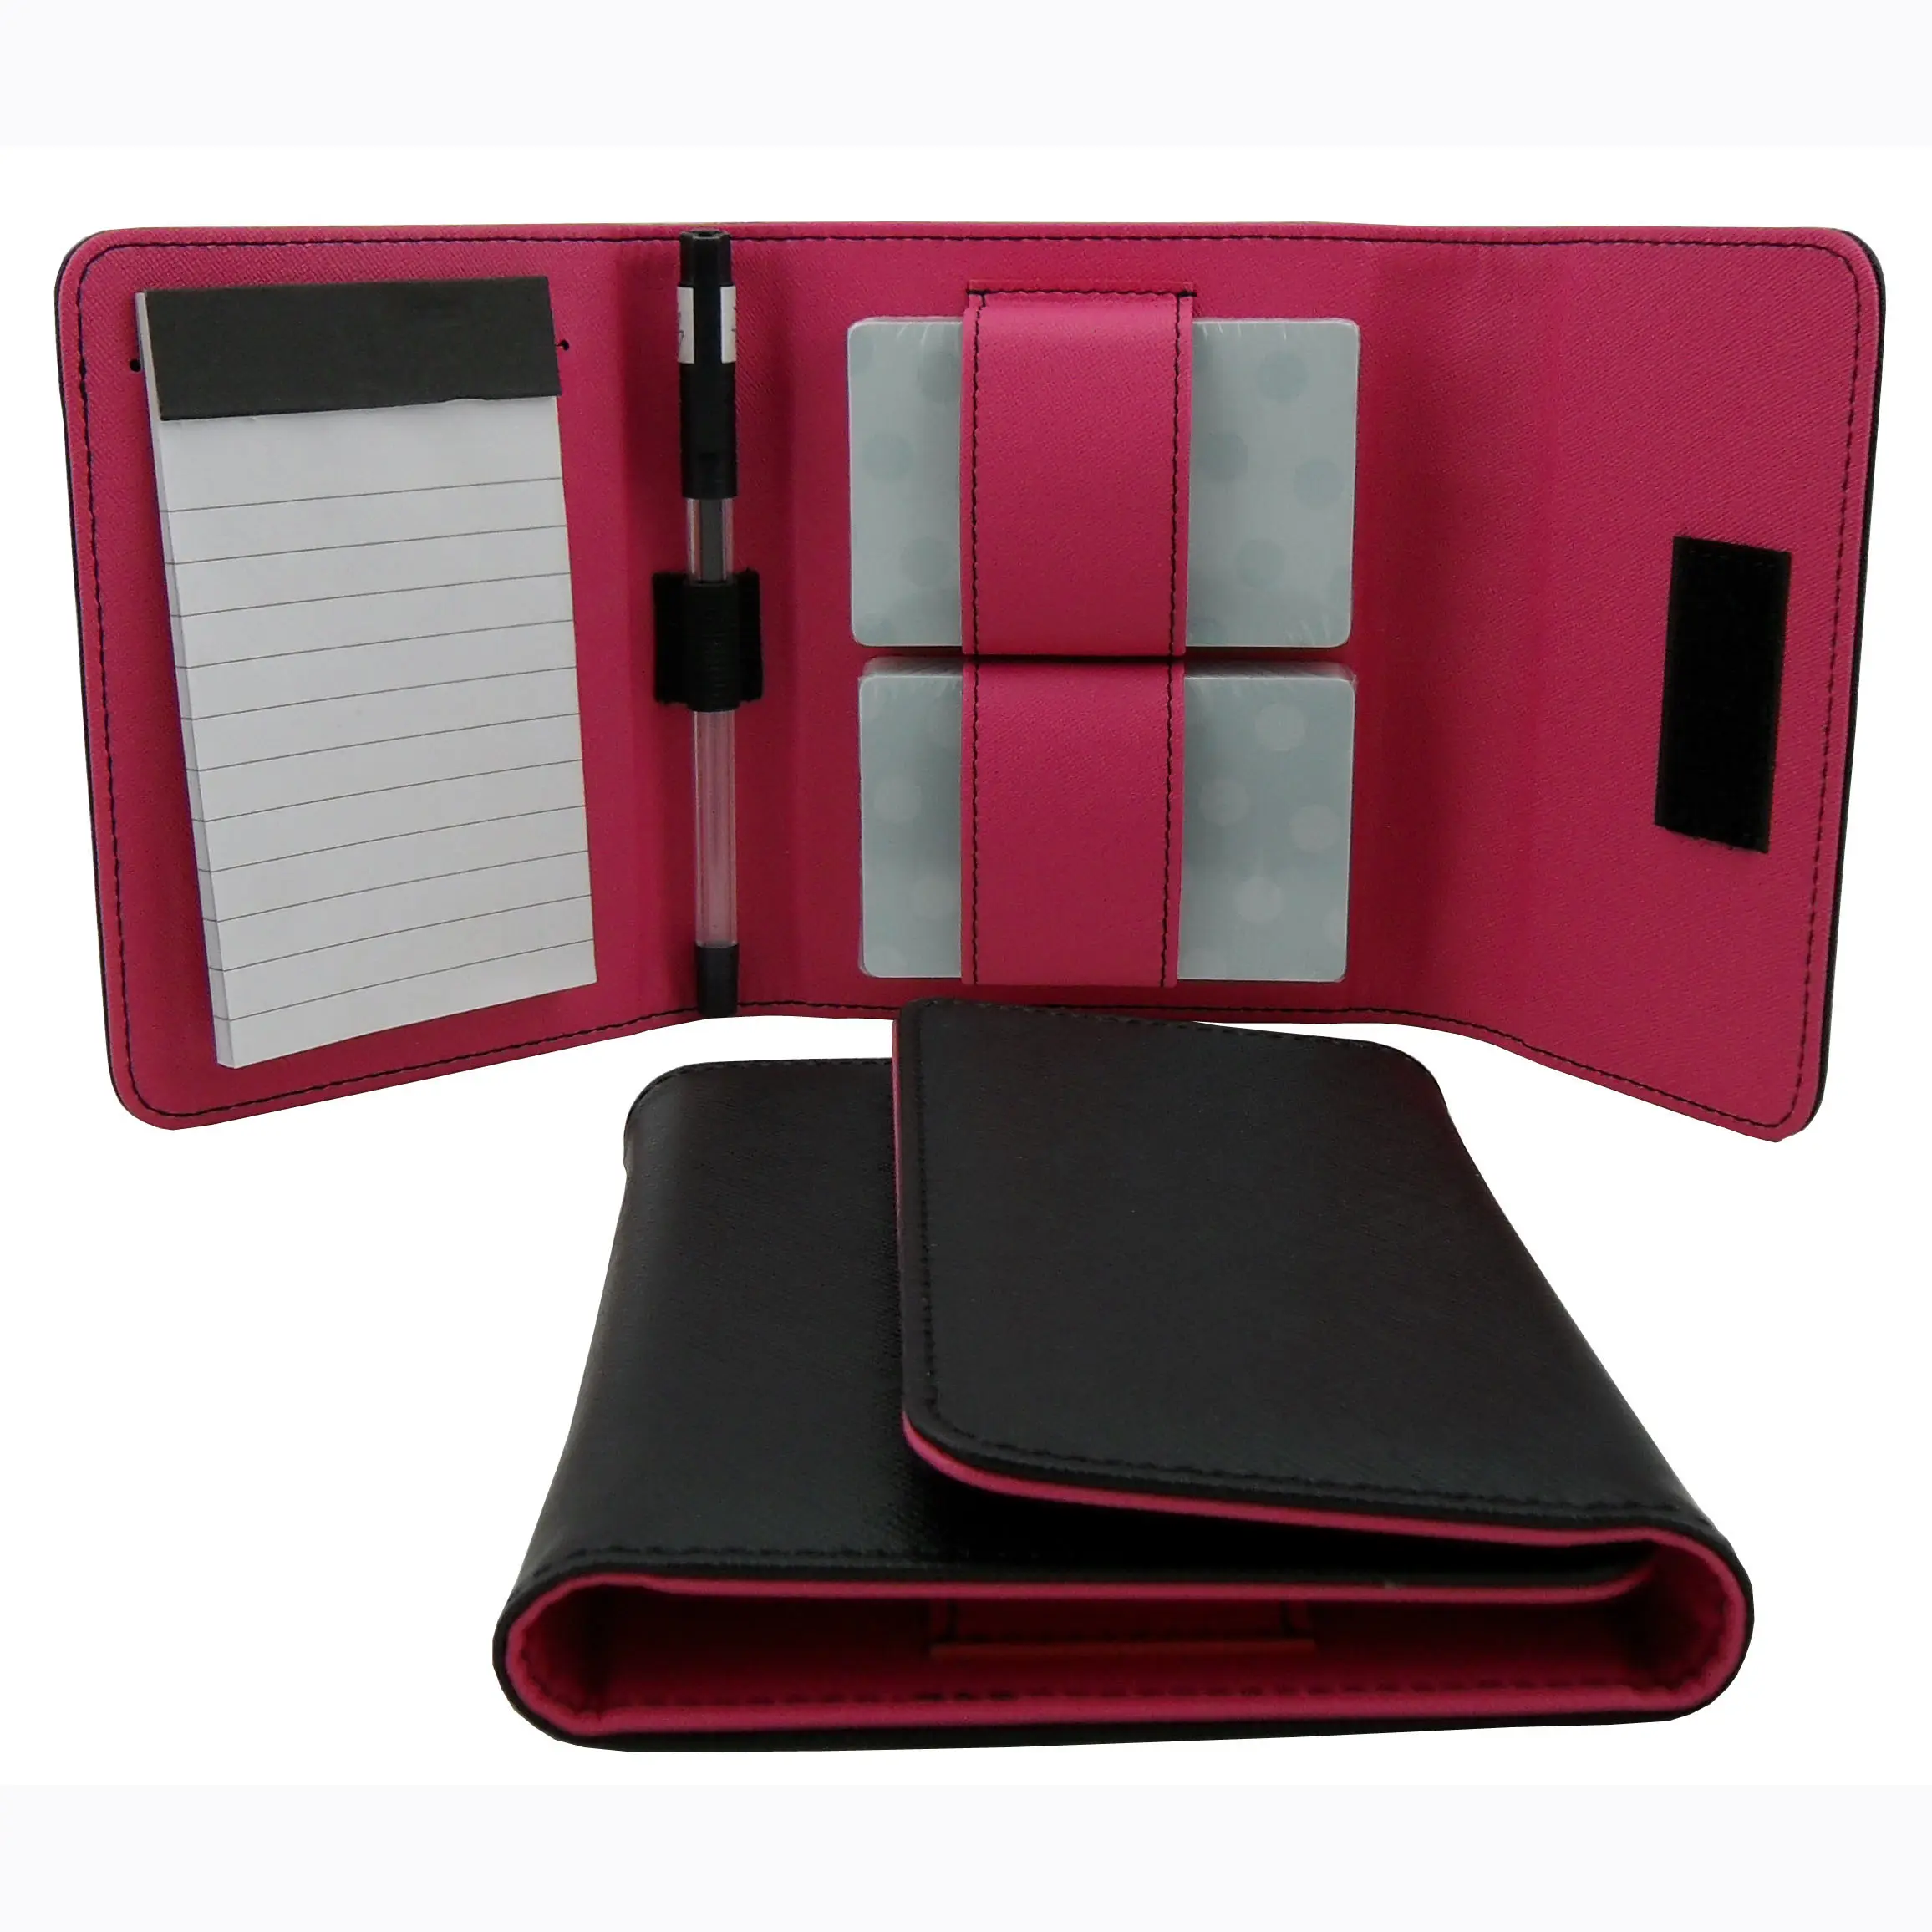 Custom PU Leather Box Pack 2 Decks Playing Card Game Sets with Pen and Notepad